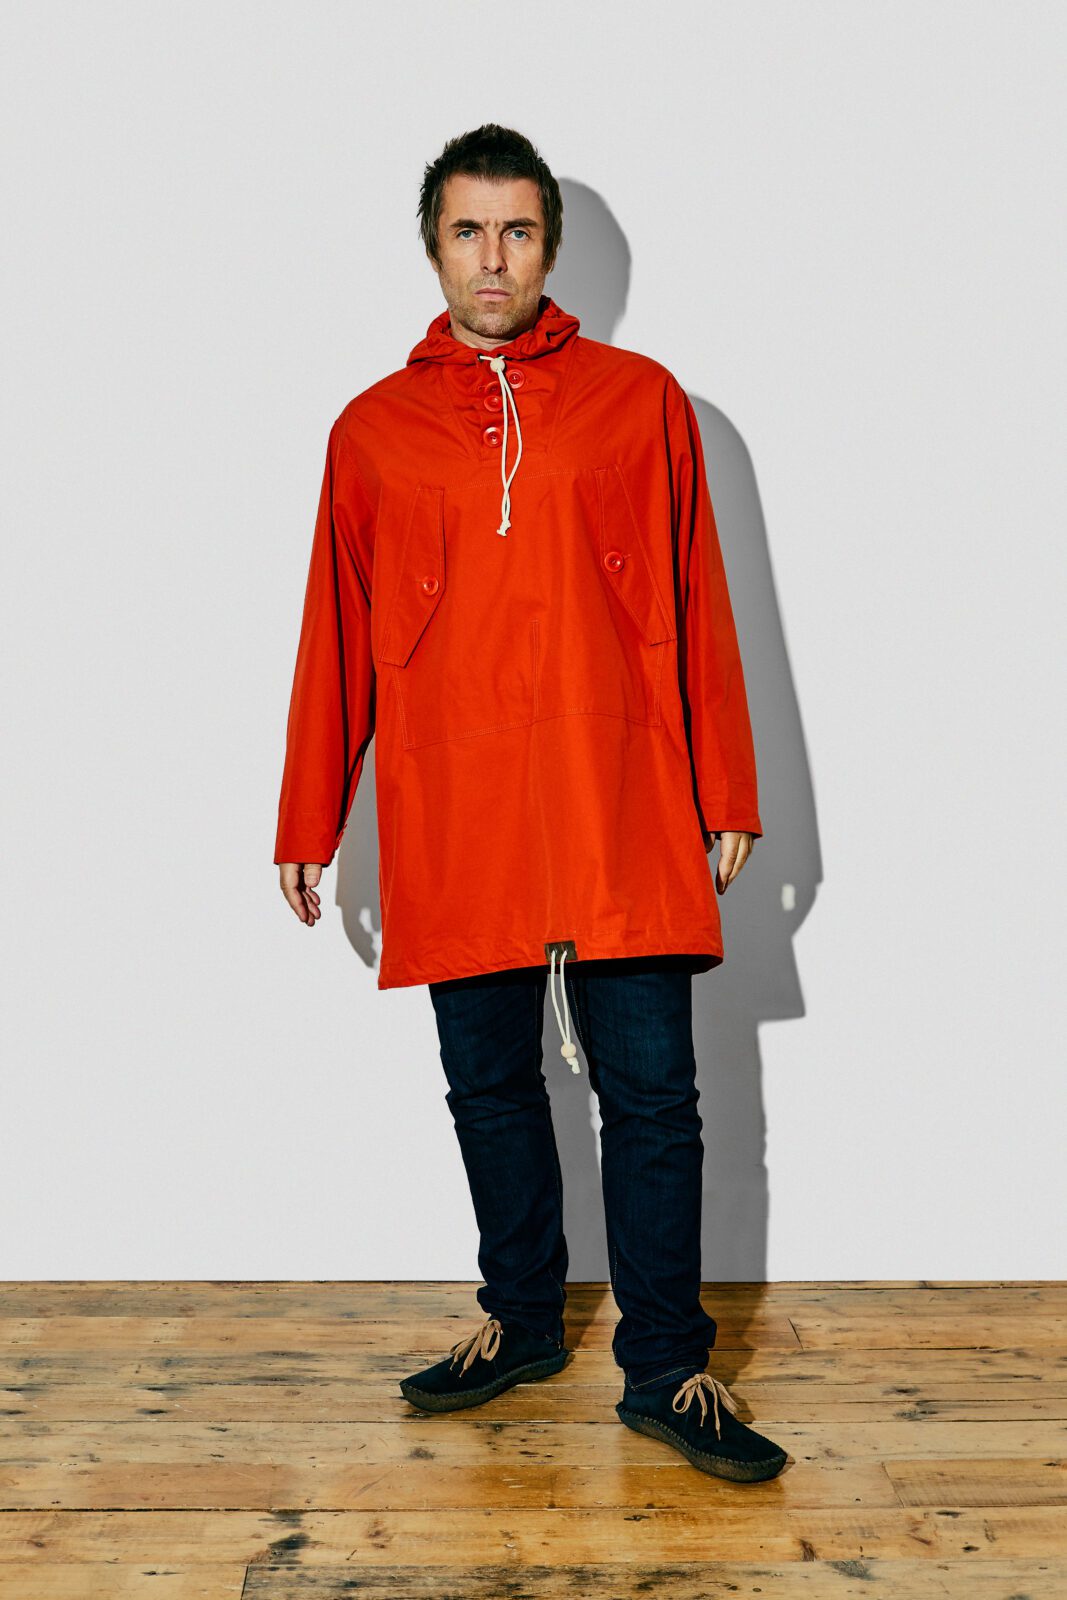 Liam Gallagher launches exclusive fashion collection with Selfridges